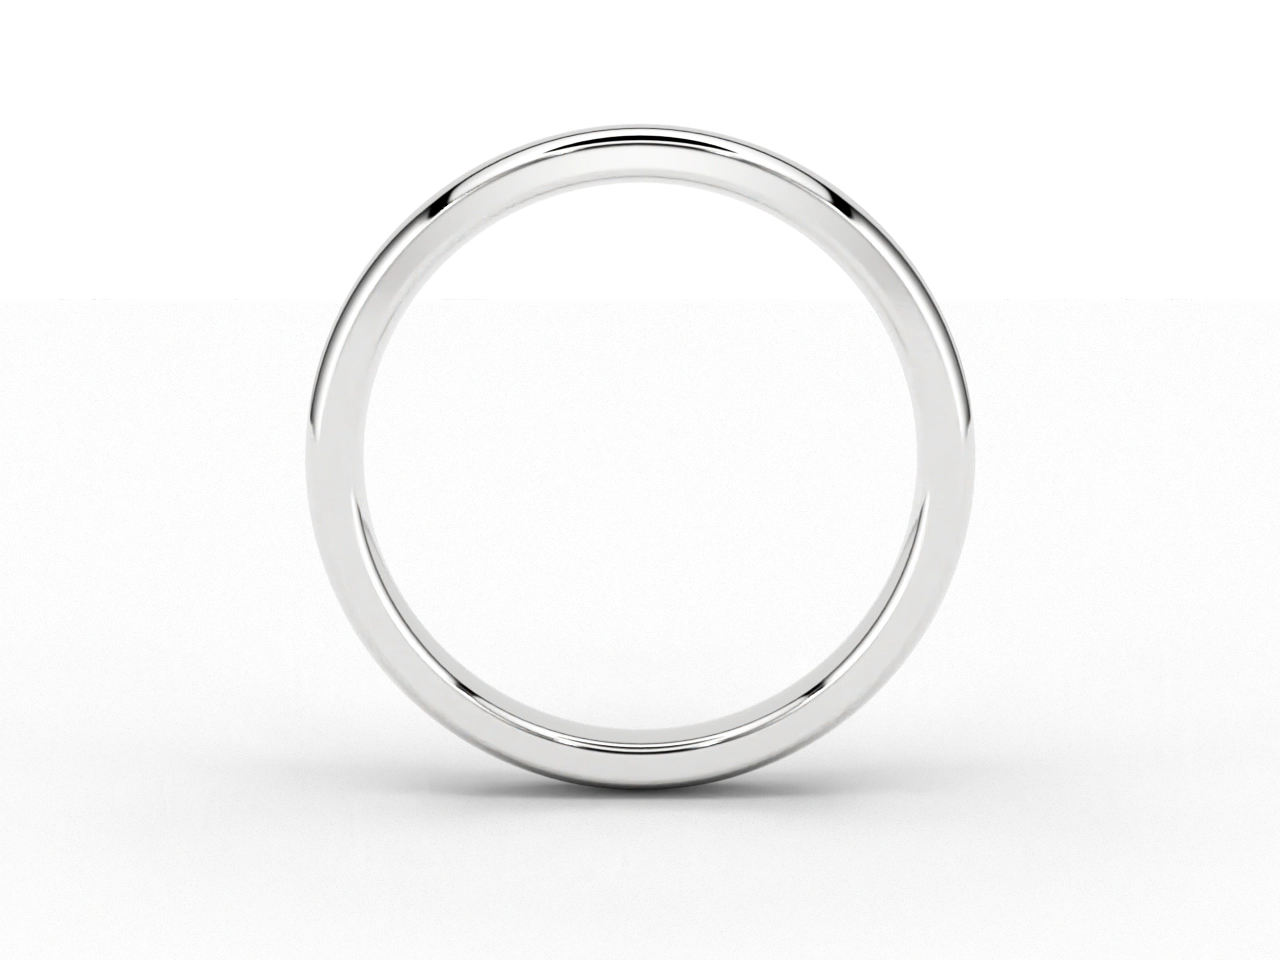 Modern Wedding Band in 3mm 18ct Recycled White Gold